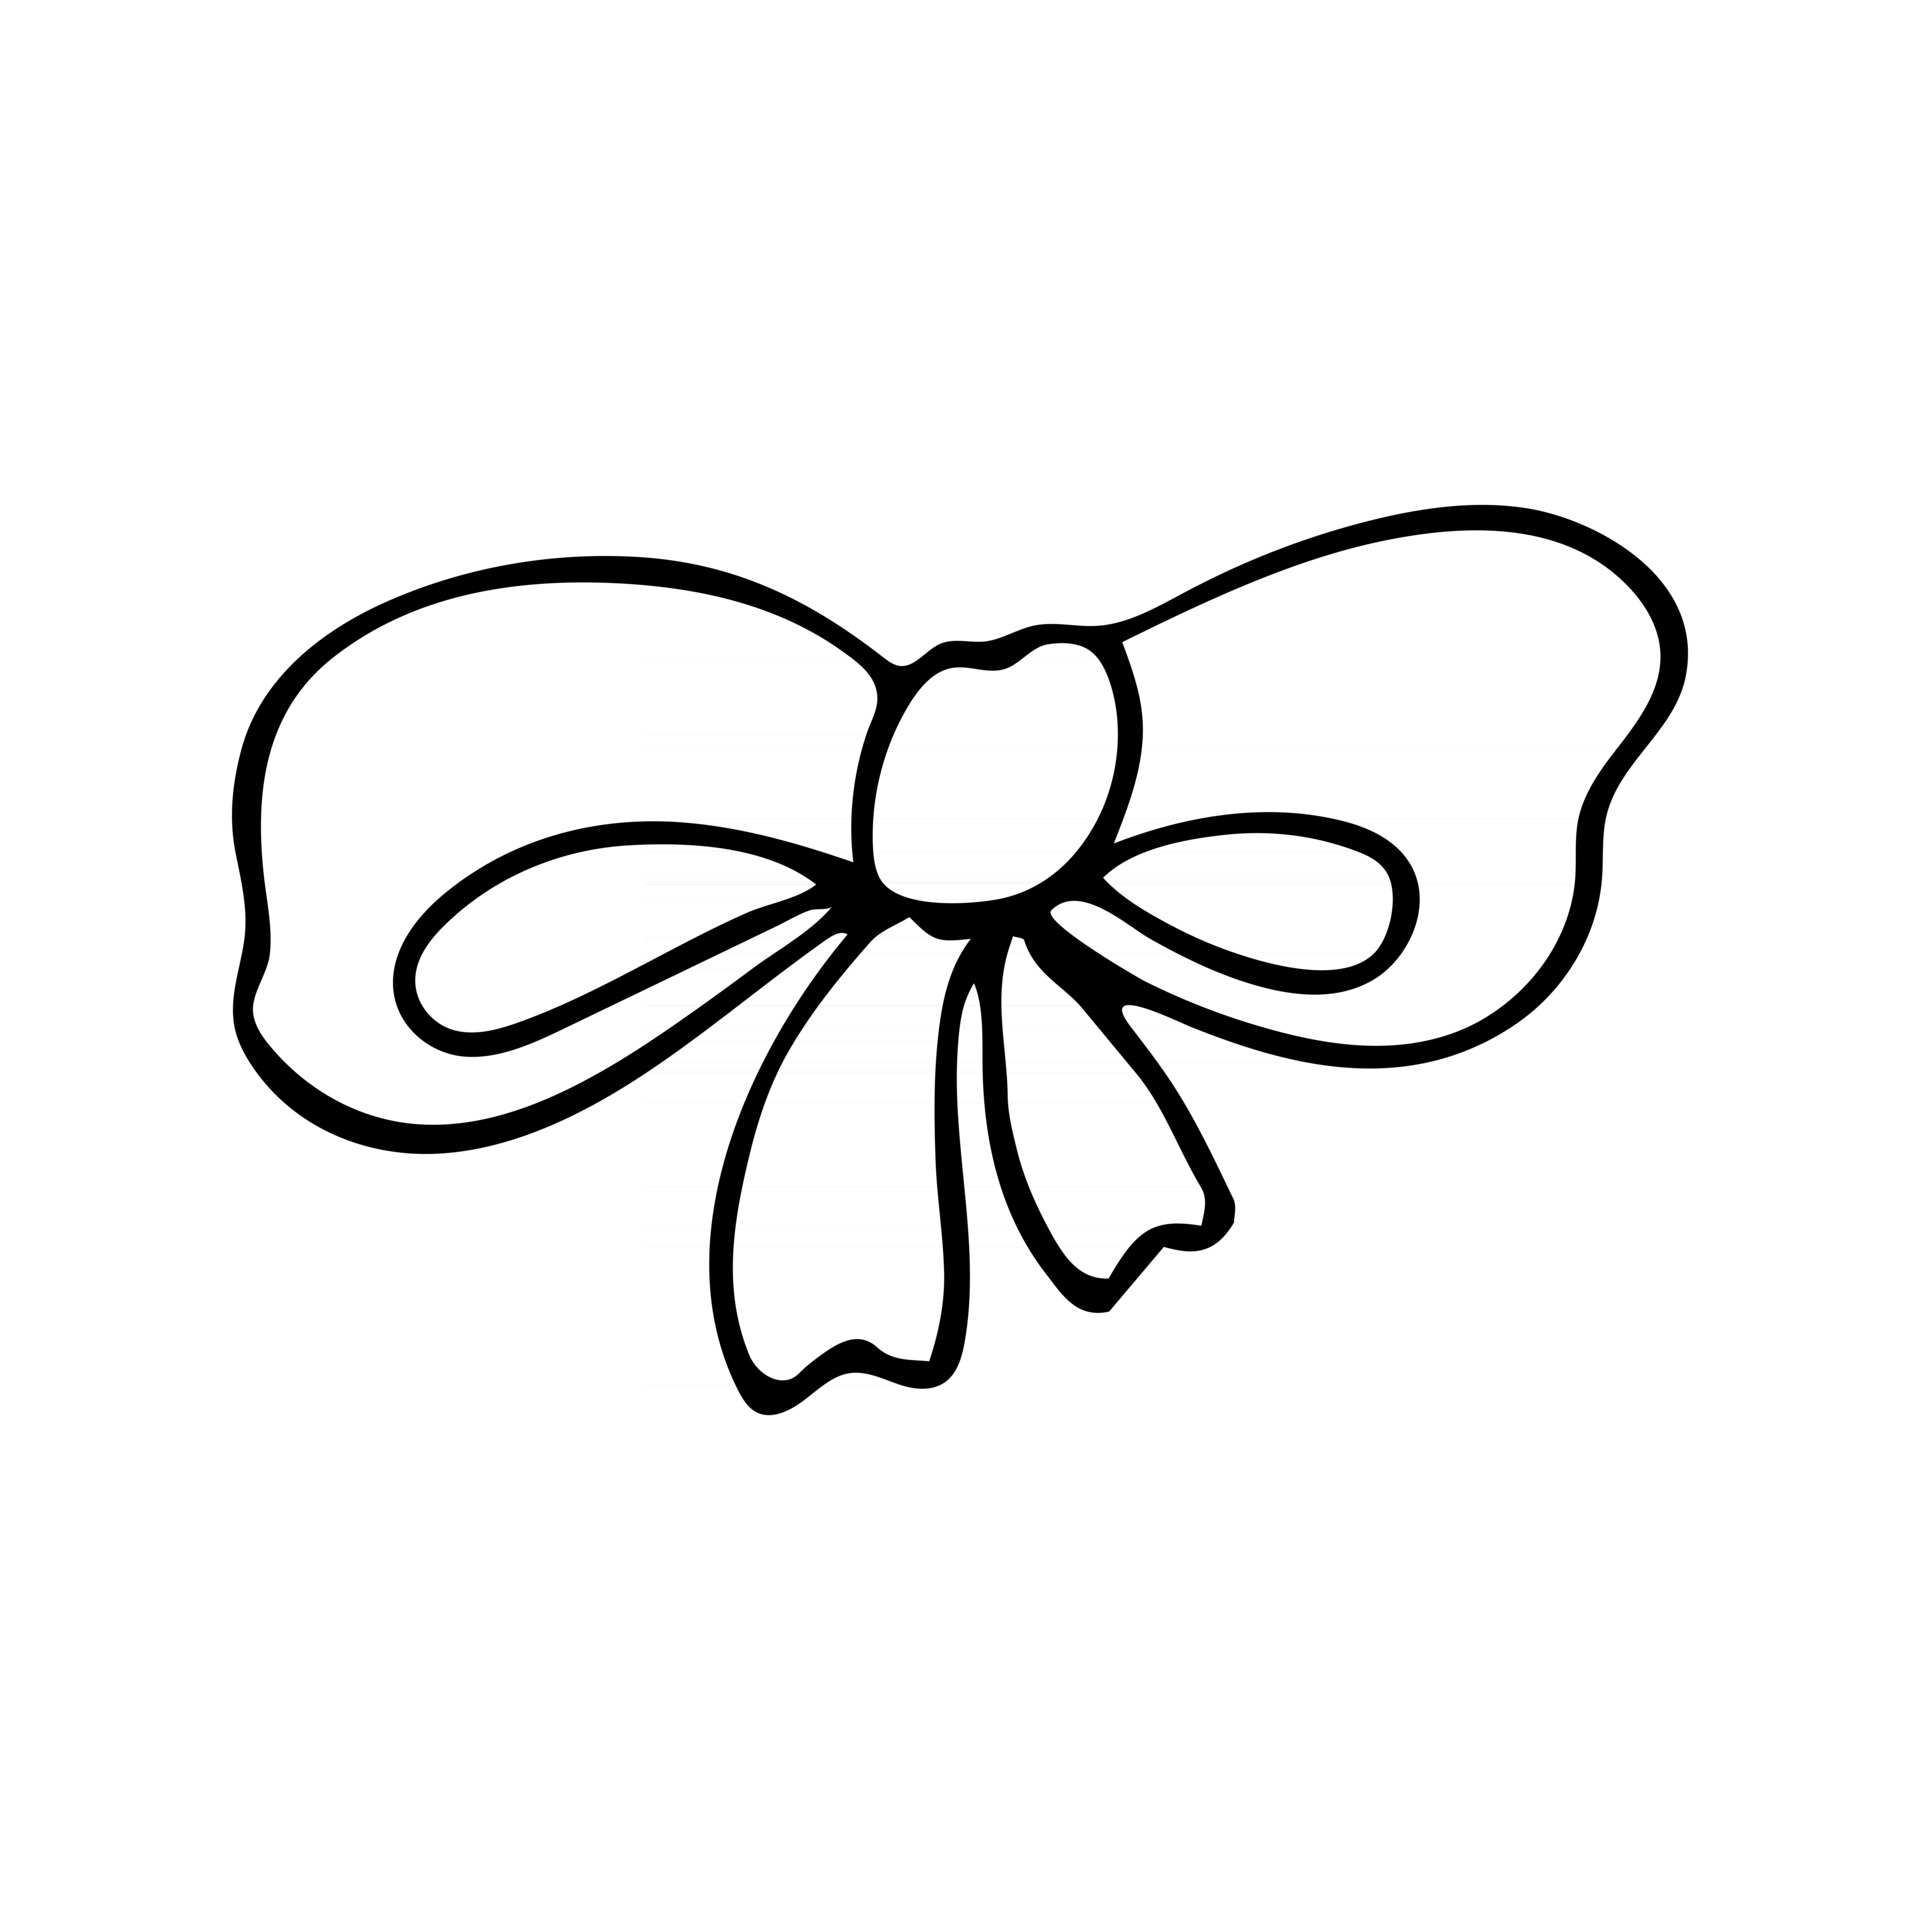 Cute bow icon Sketch drawing isolated on white background. Festive ...